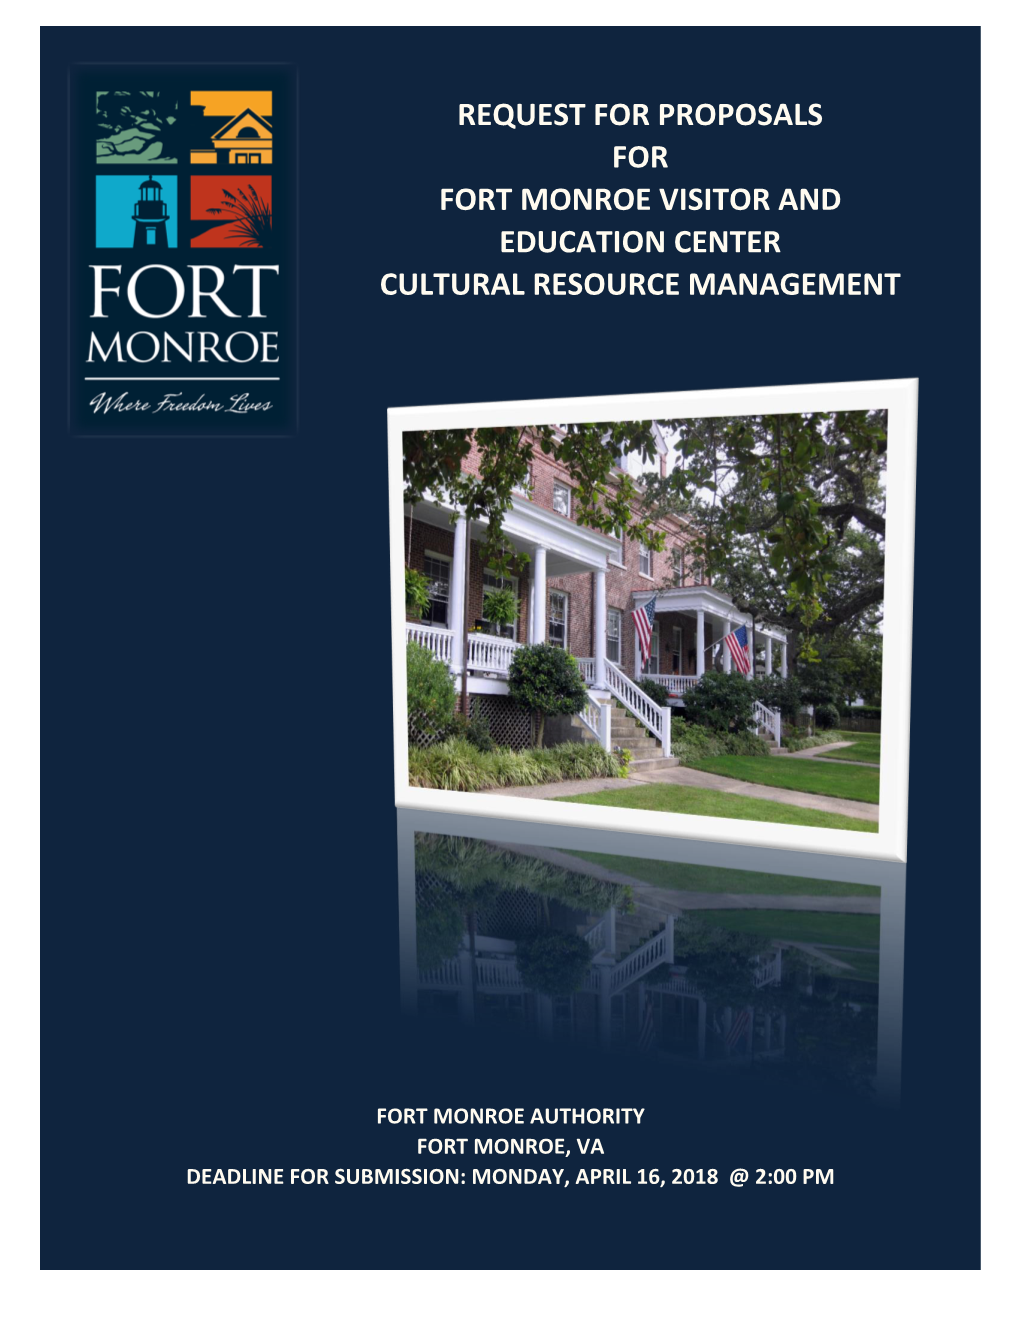 Request for Proposals for Fort Monroe Visitor and Education Center Cultural Resource Management